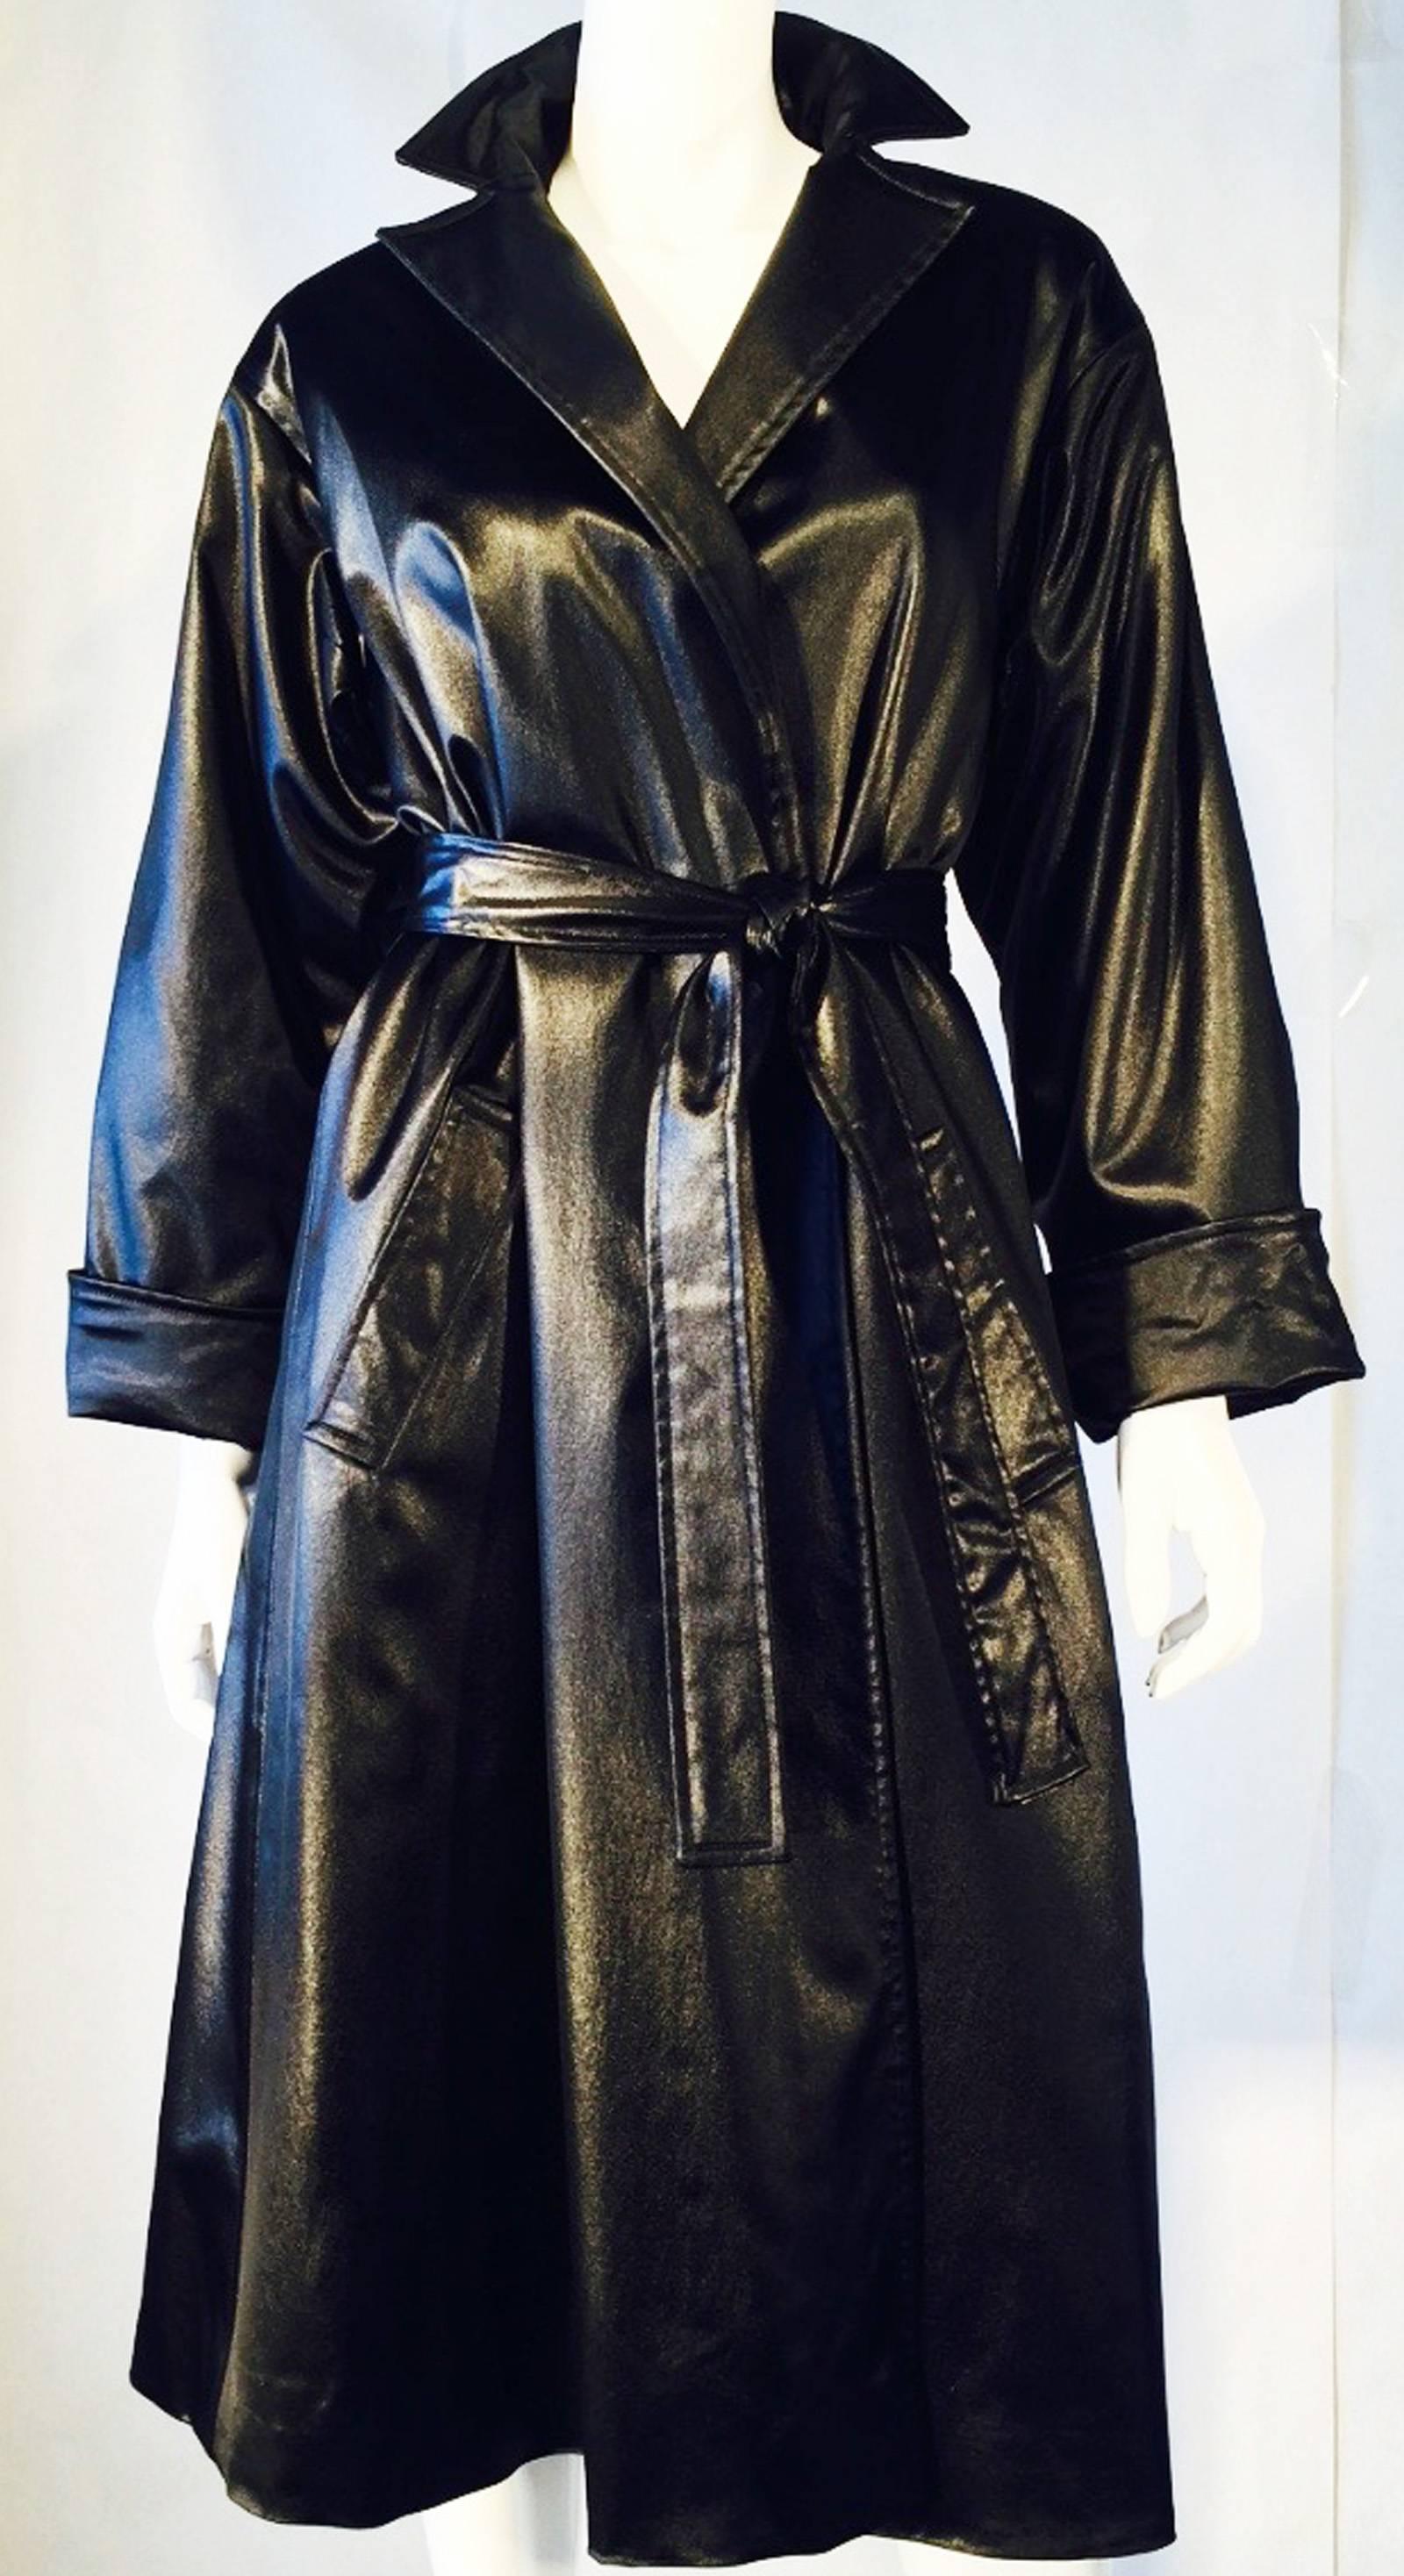 A fine and rare vintage Halston belted satin coat. Black silk item features a wrap front and attached matching sash belt. Pristine appears unworn.